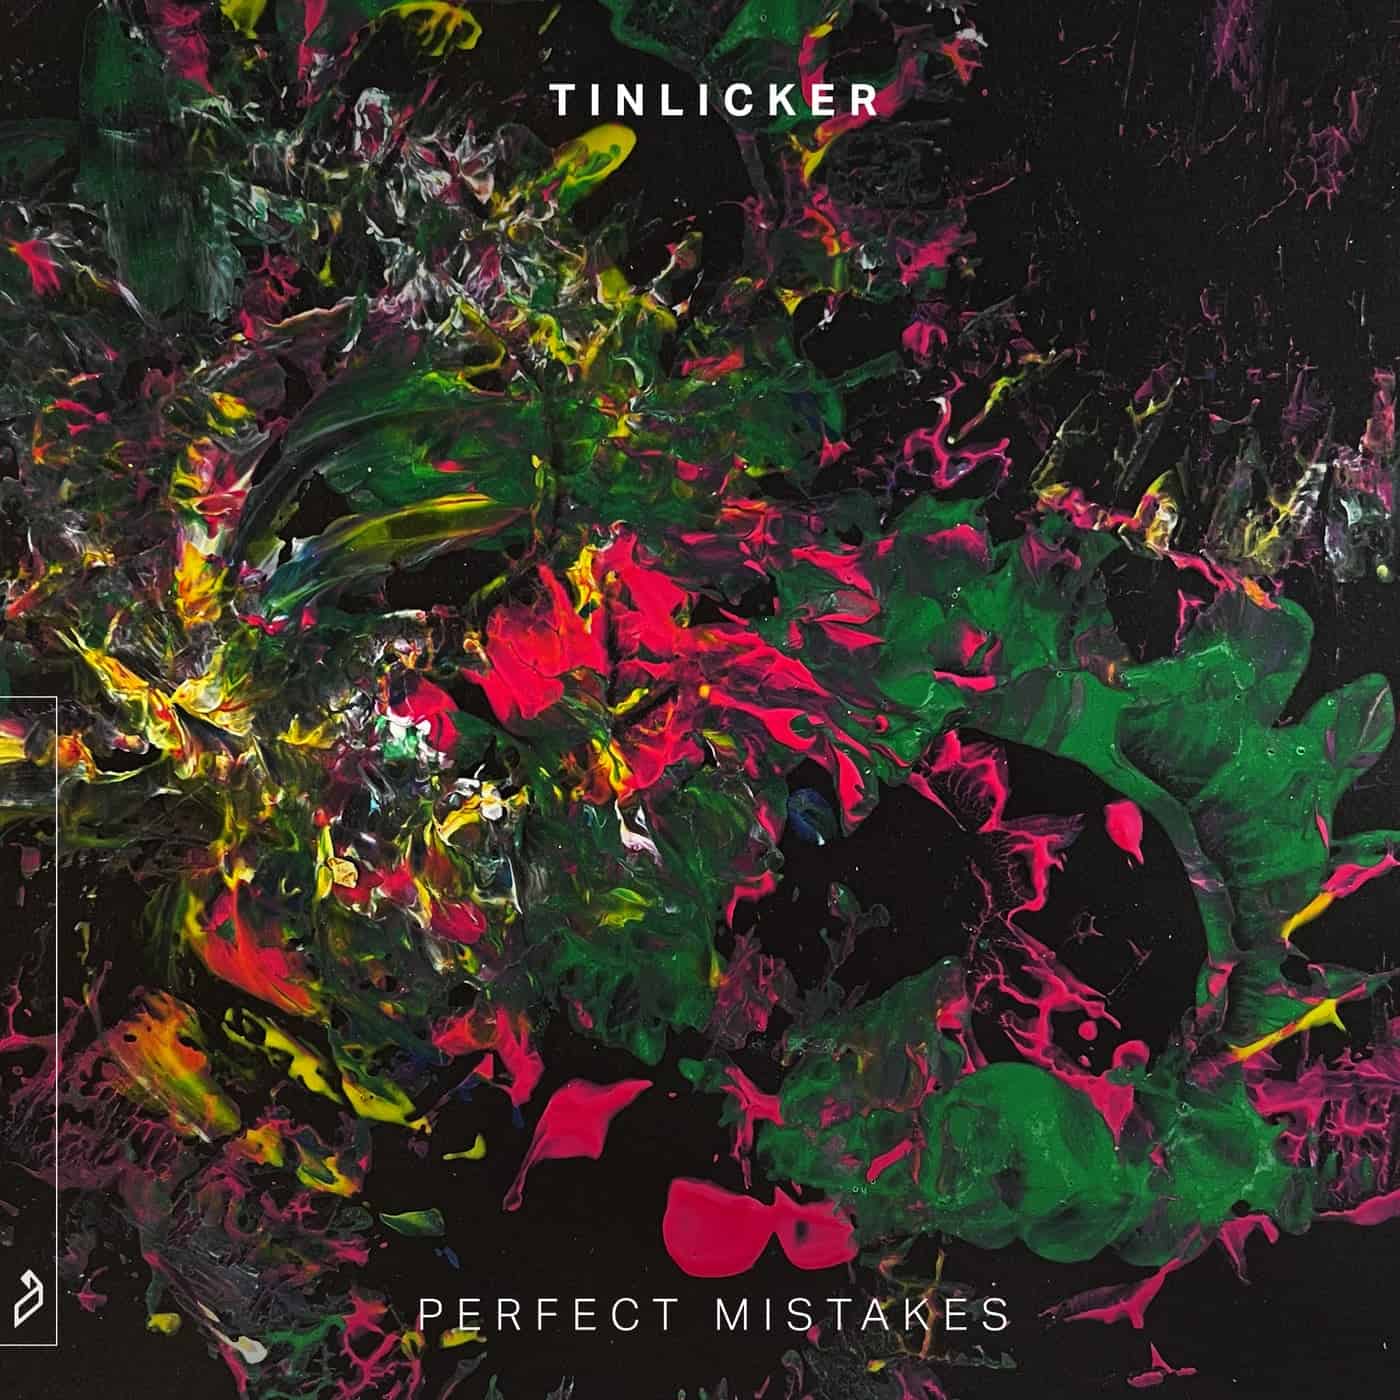 image cover: Tinlicker, Ben Böhmer, Thomas Oliver - Perfect Mistakes / ANJDEE729BD